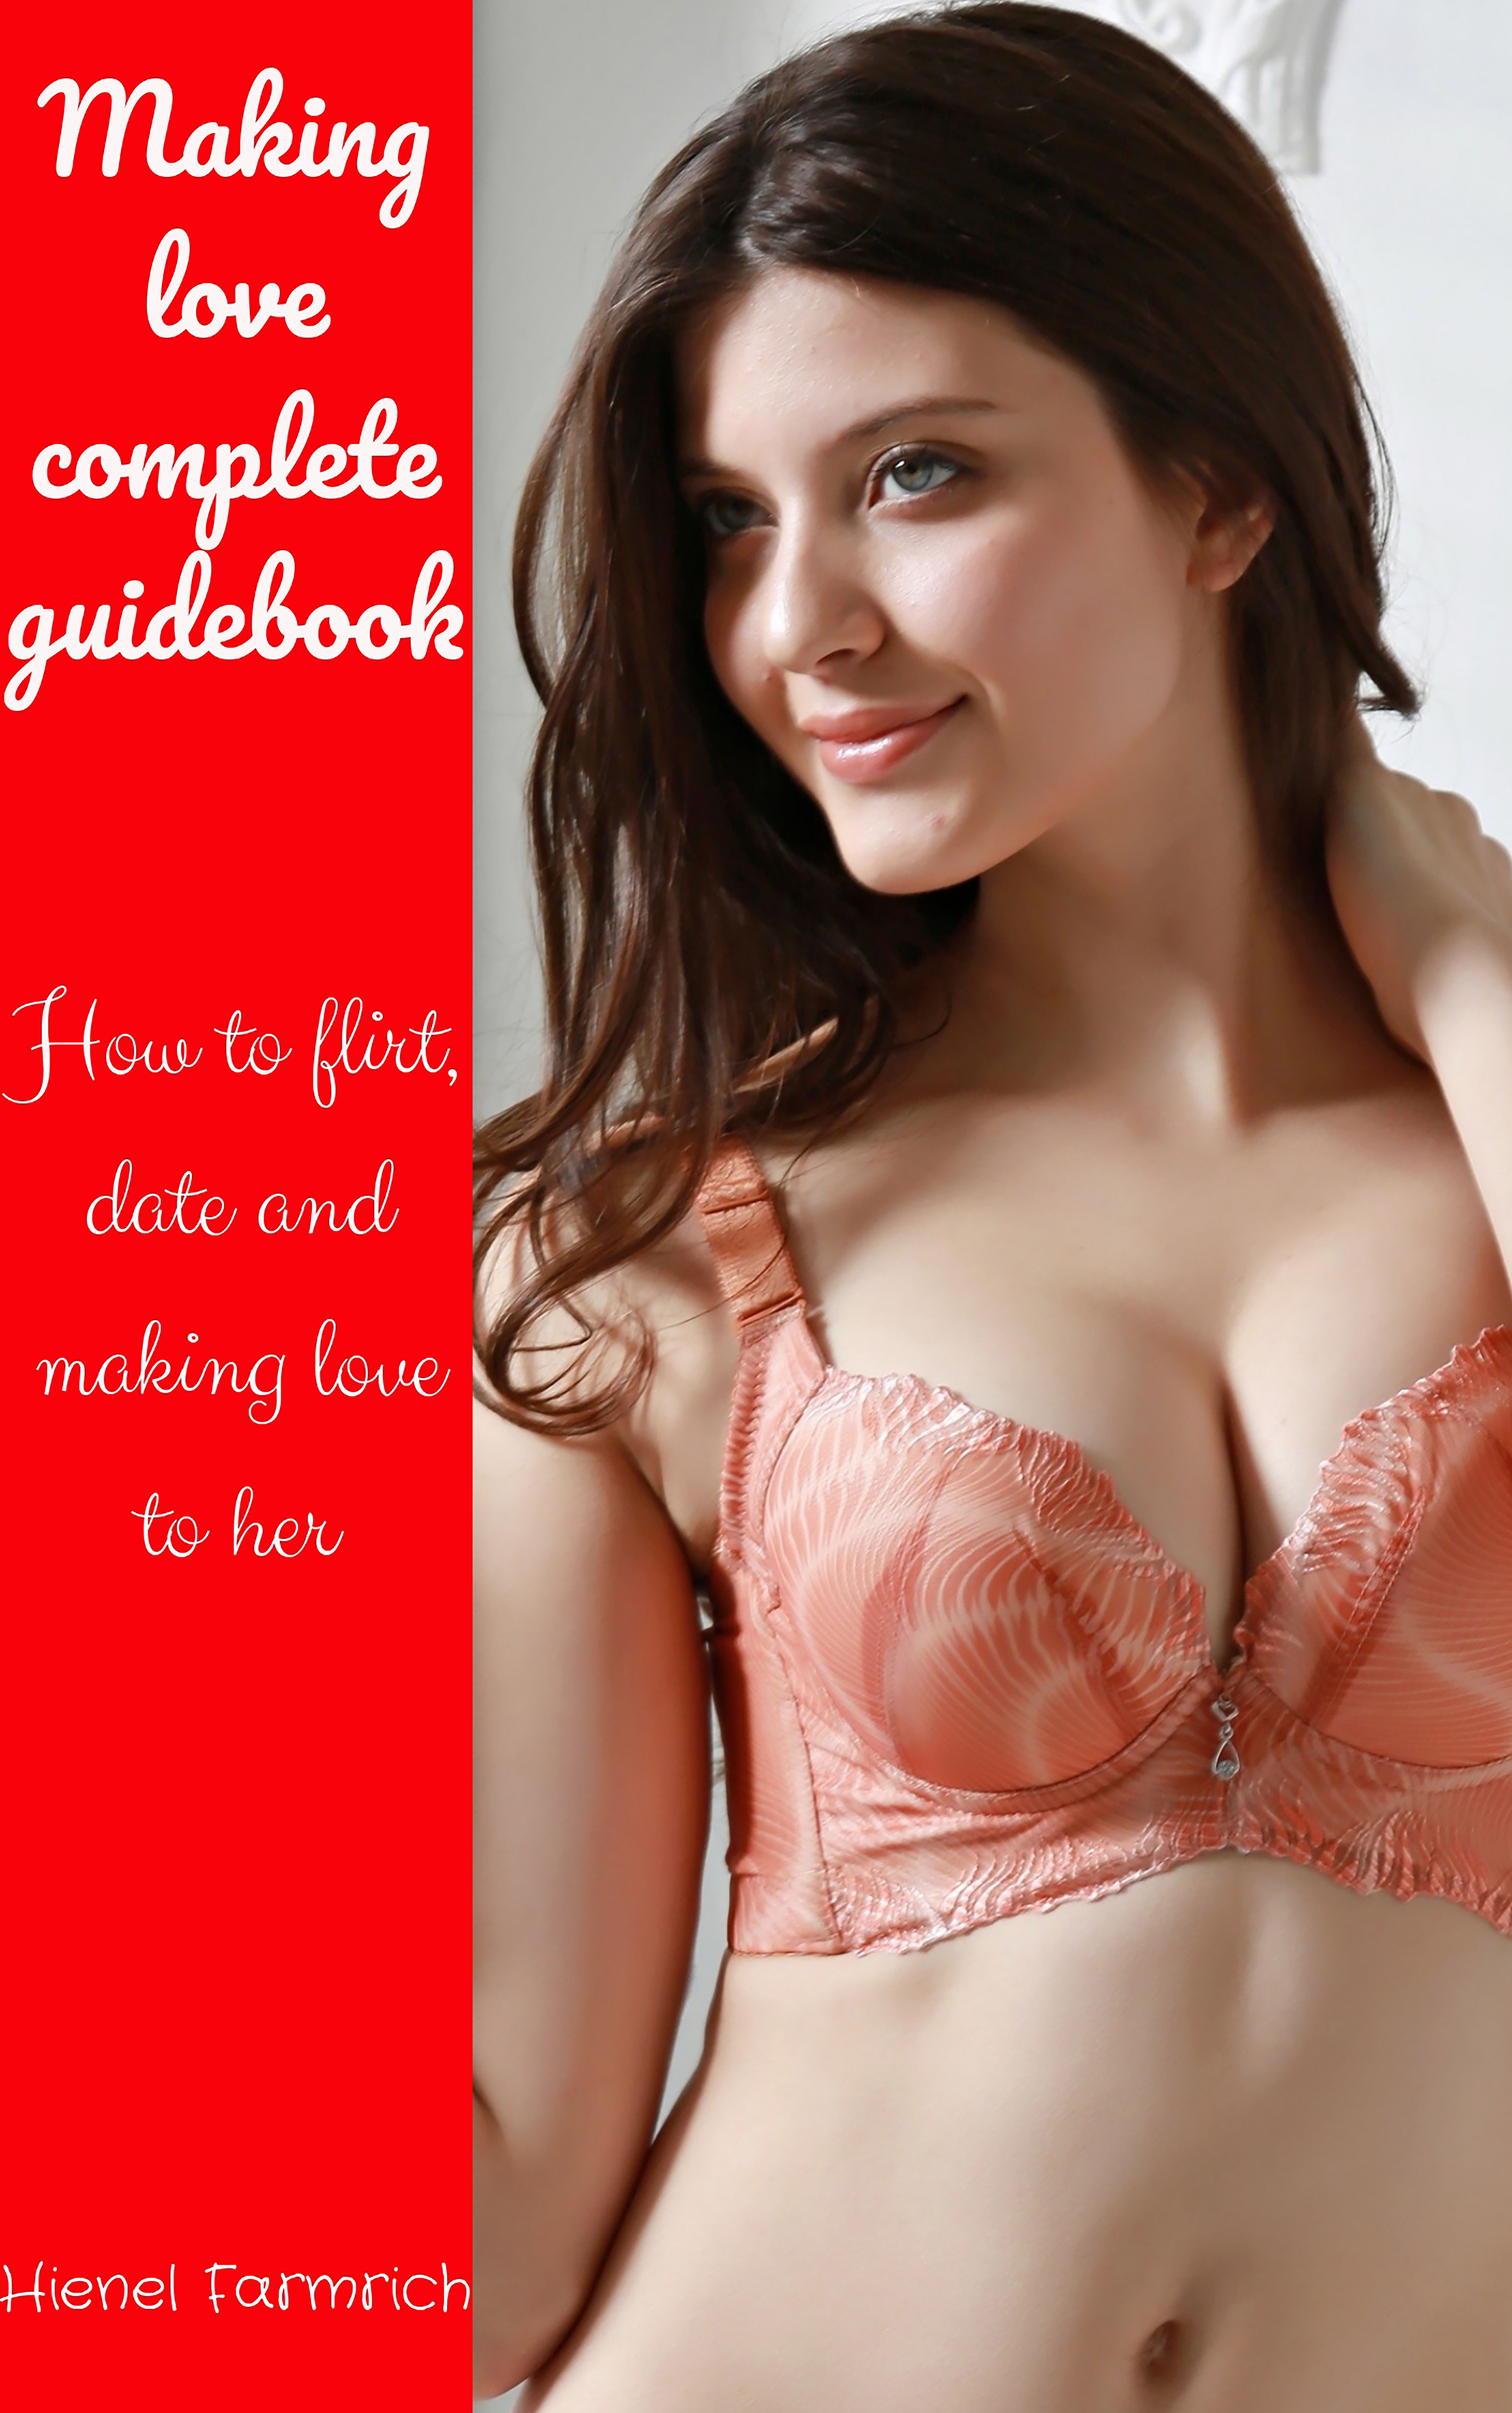 FREE: Making love complete guidebook by Hienel